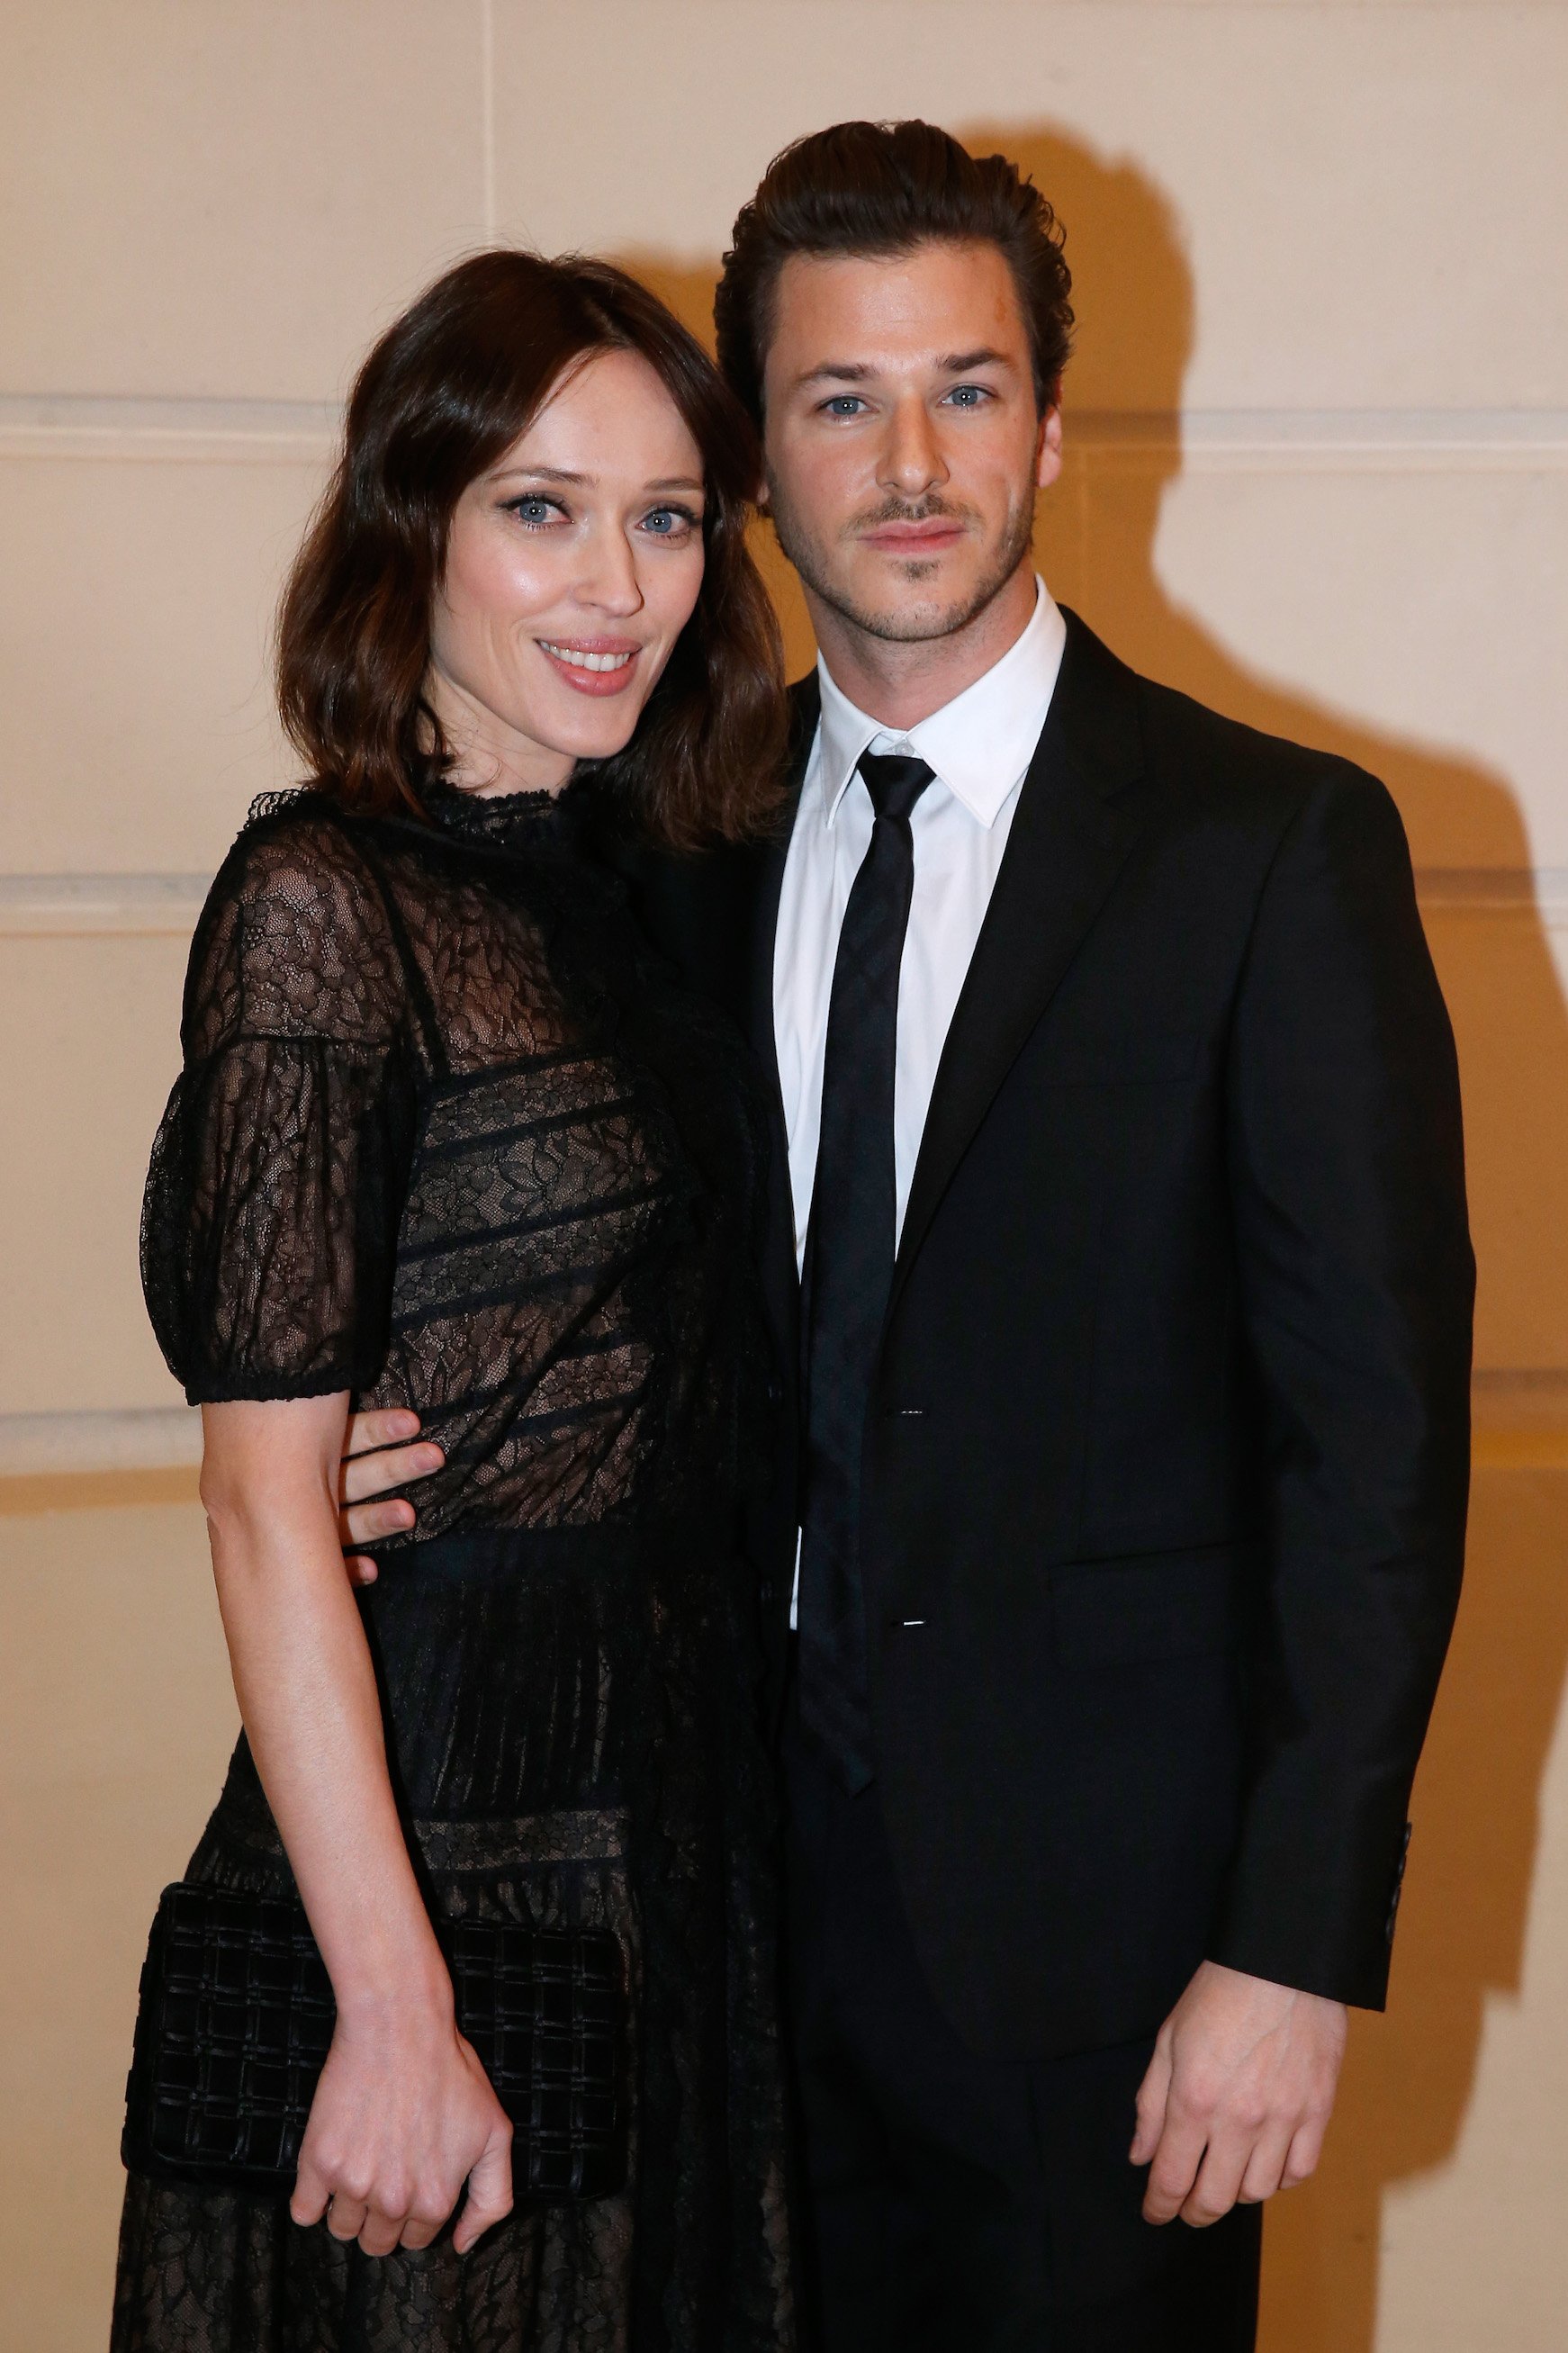 Gaspard Ulliel's Partner, Gaëlle Piétri, standing next to him and smiling